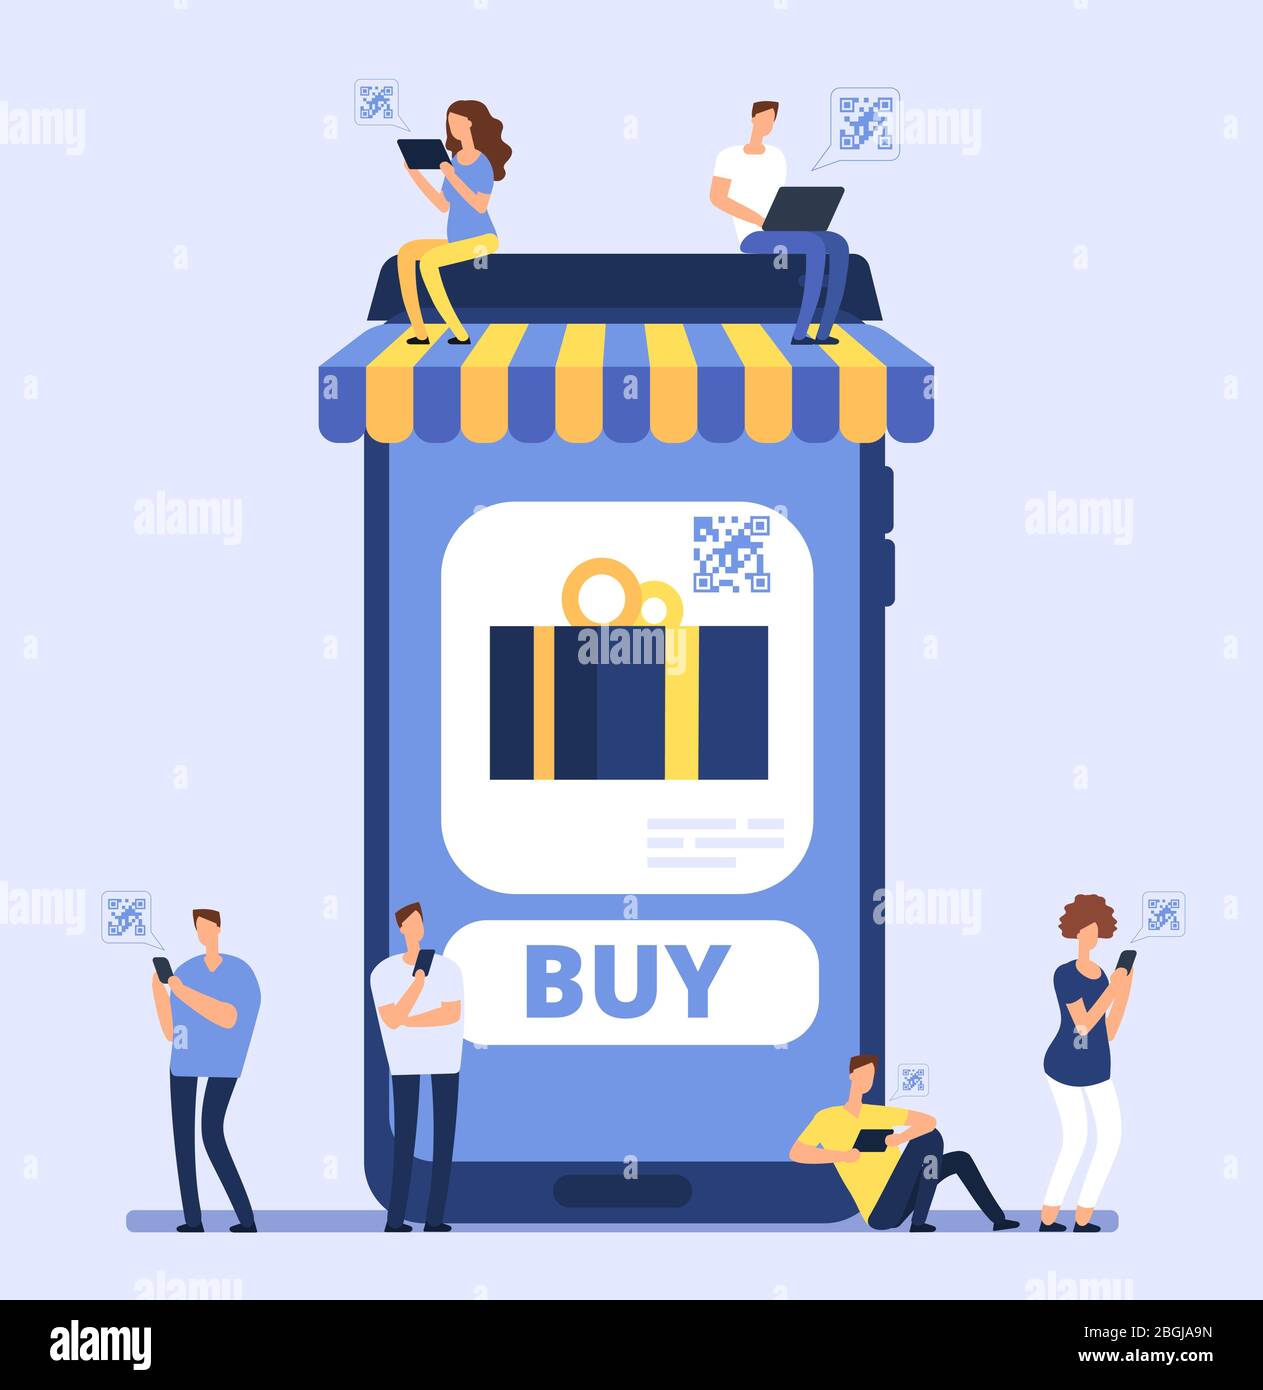 People using smartphone for mobile shopping. Men women buy goods in internet store with cell phone and banking app. Vector concept online shop, e-commerce purchasing retail illustration Stock Vector